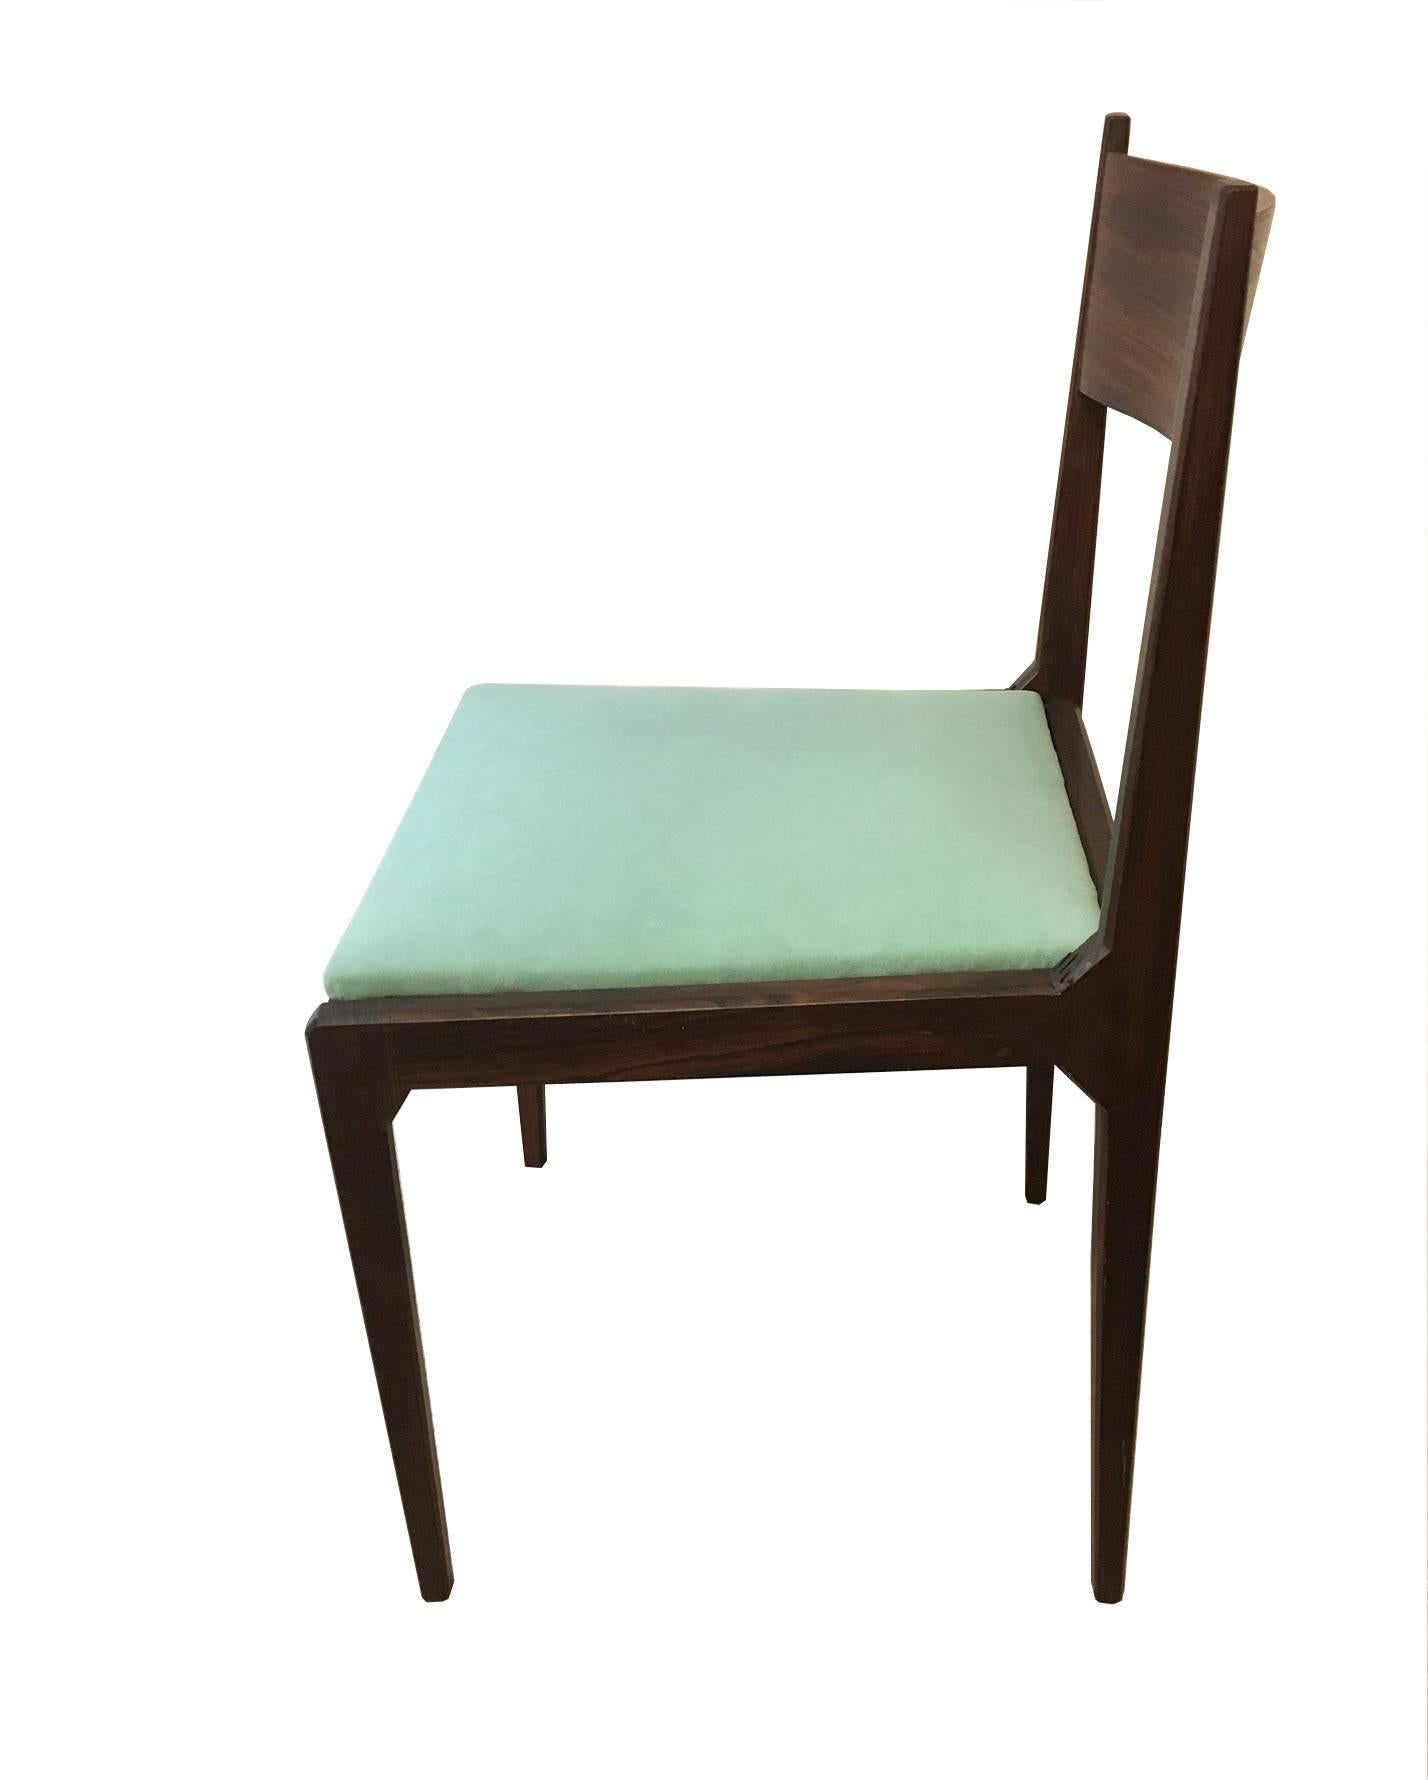 Mid-20th Century Gio Ponti and Rosselli Rosewood and Green Fustian Italian Dining Chairs, 1959 